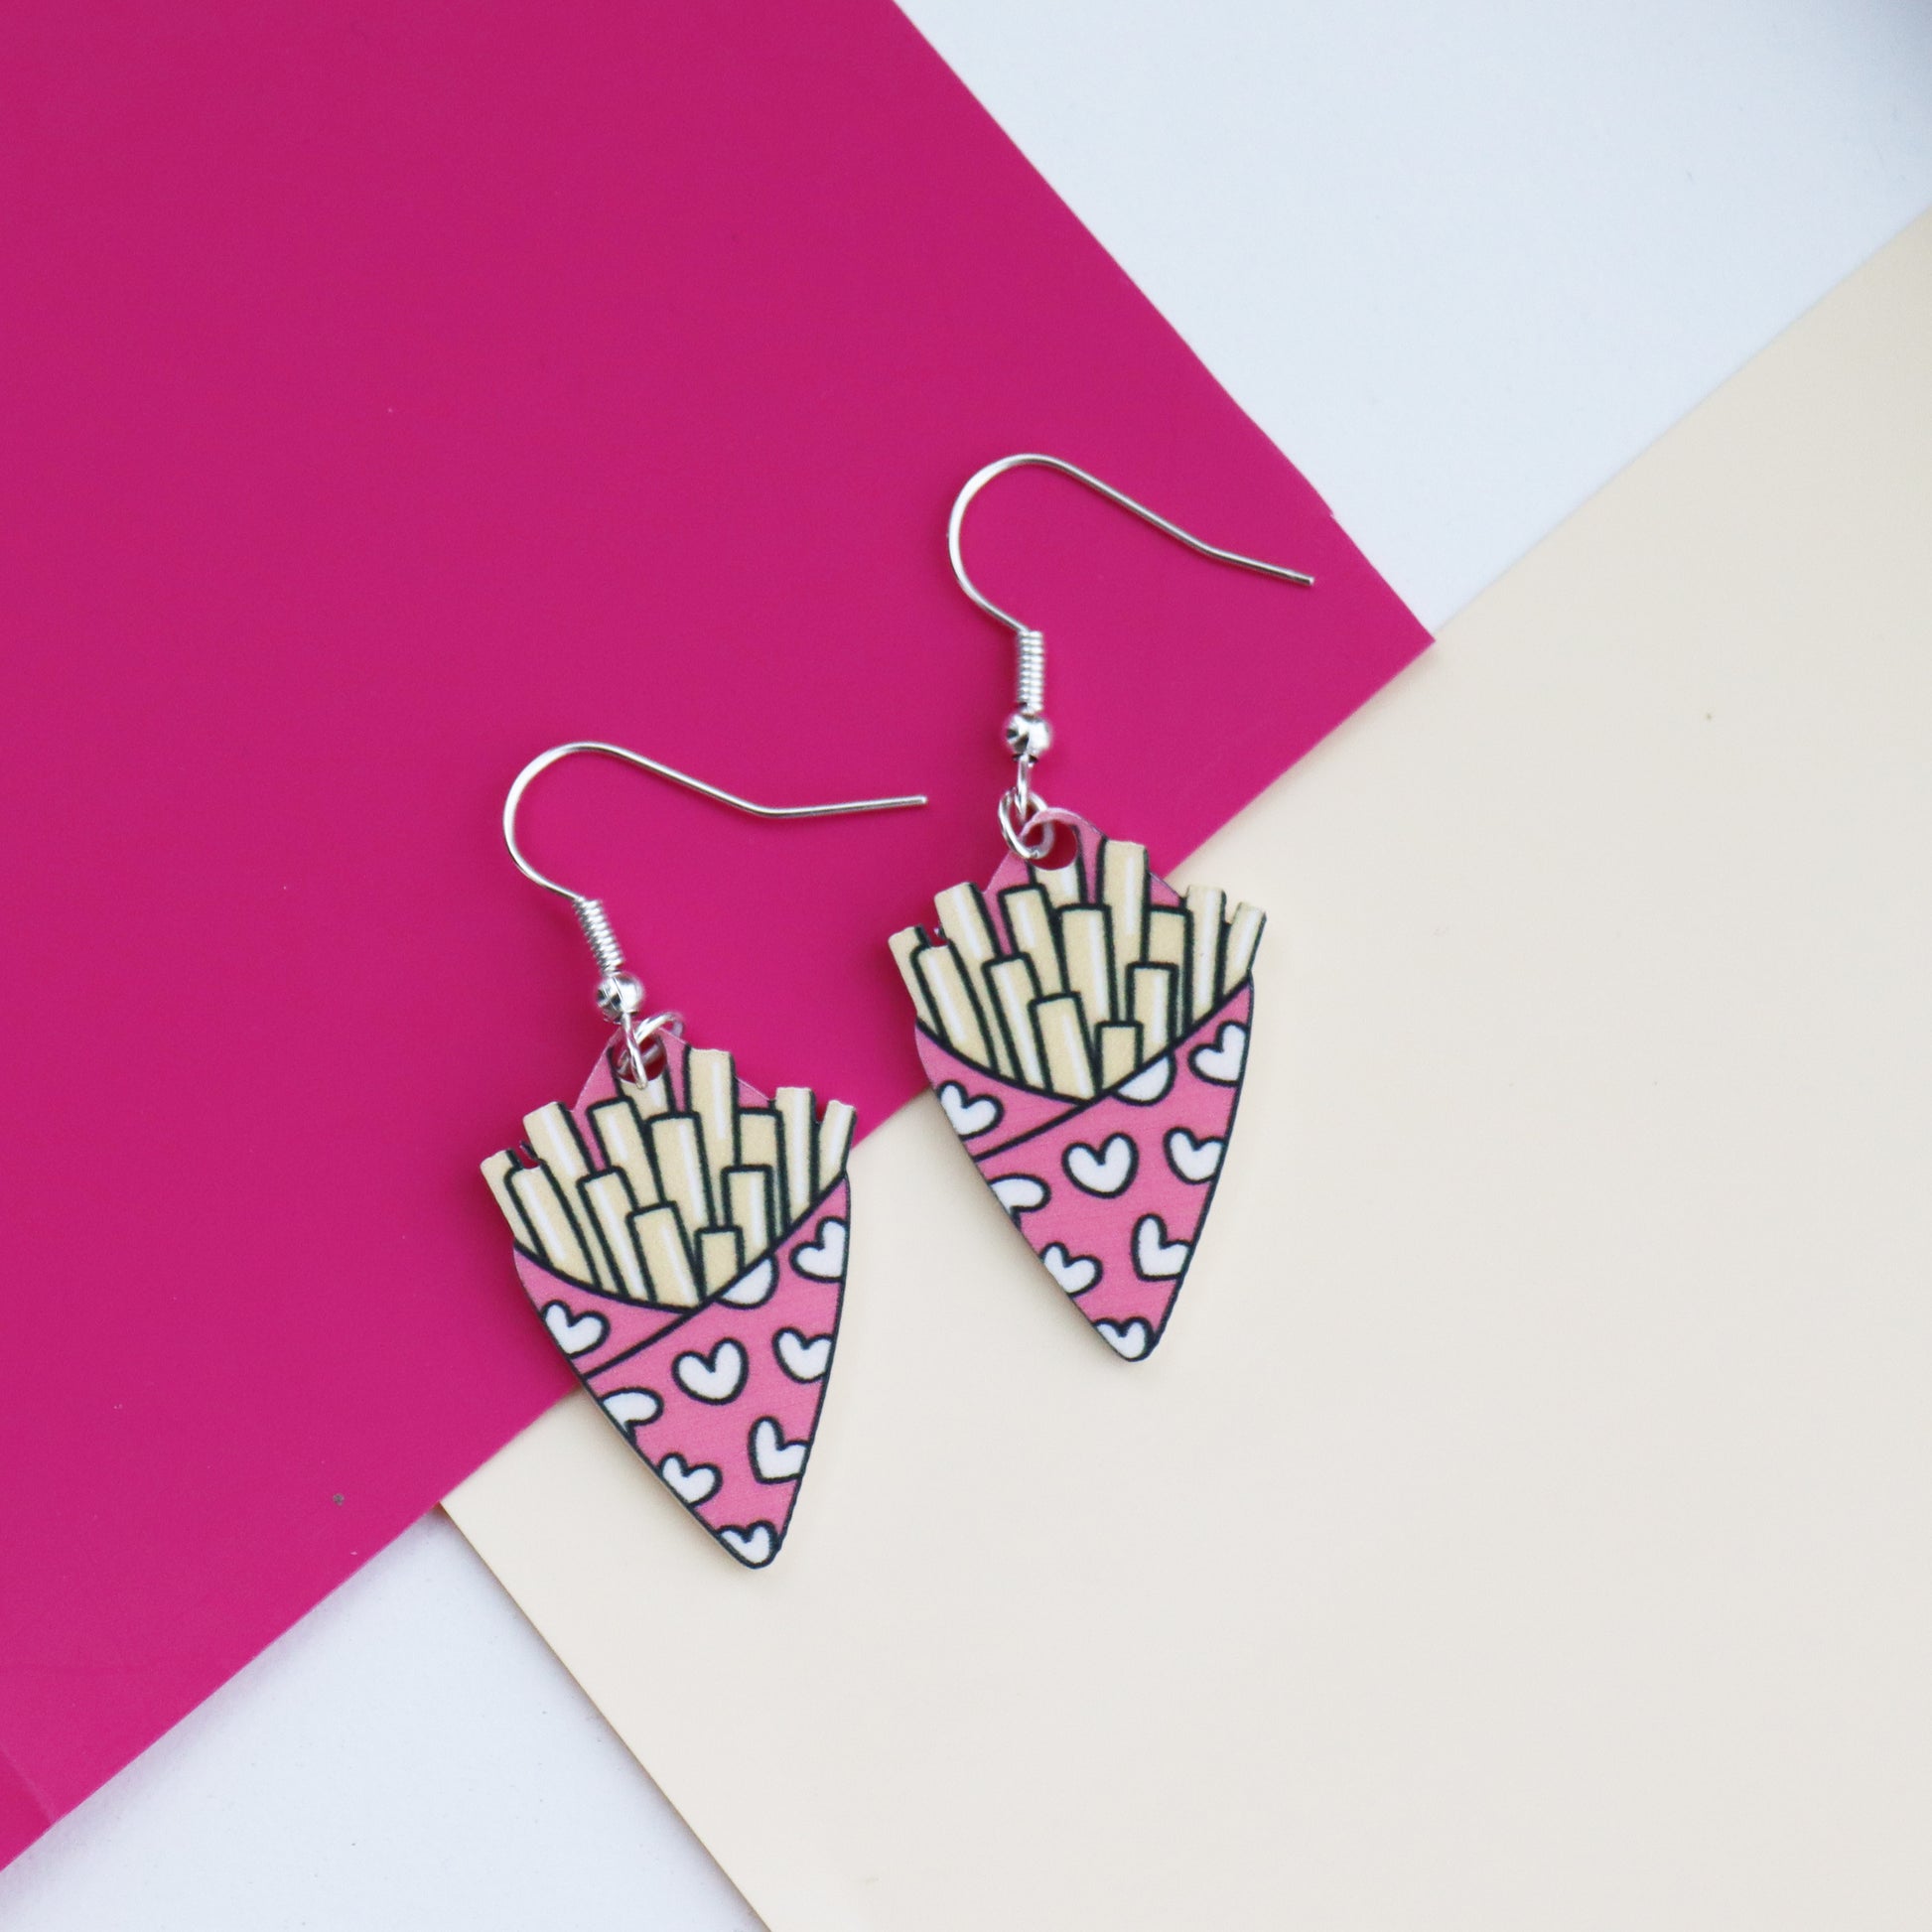 fries before guys earrings cut from acrylic and printed with a bag of chips design the bag of chips is pink and has hearts printed on it